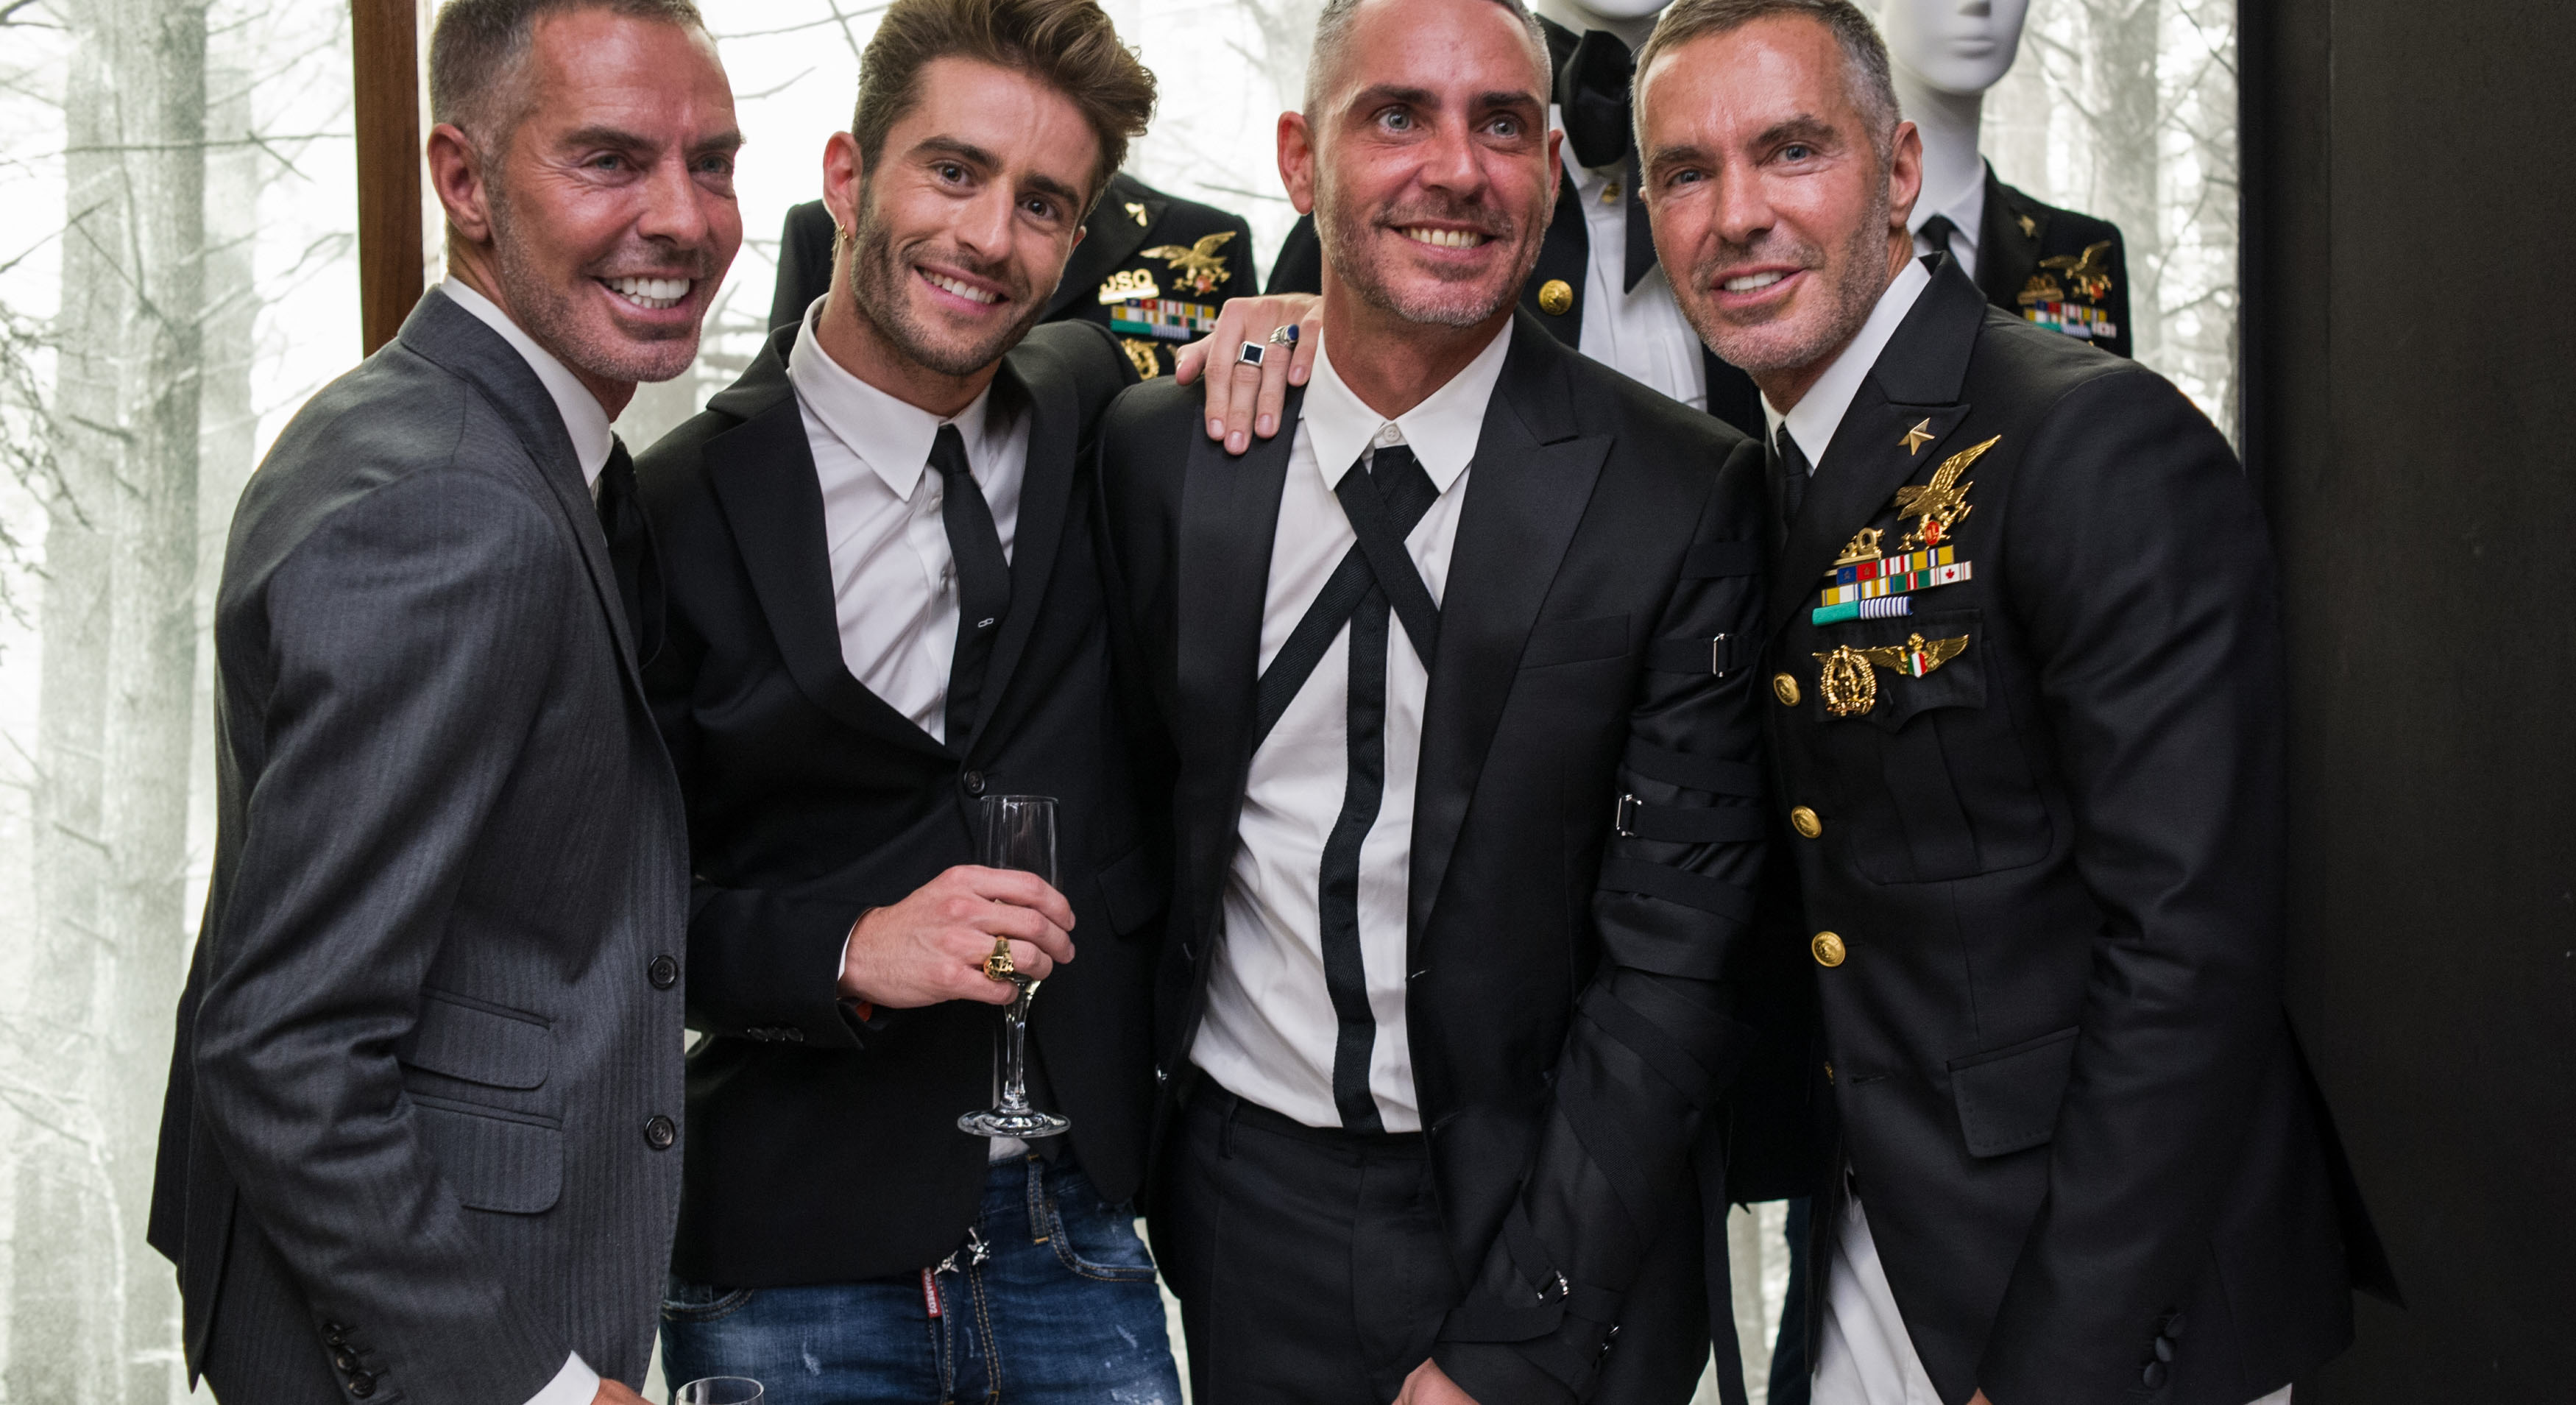 Dean and Dan Caten with Pelayo Diaz and Sergio Bernal in Dsquared2